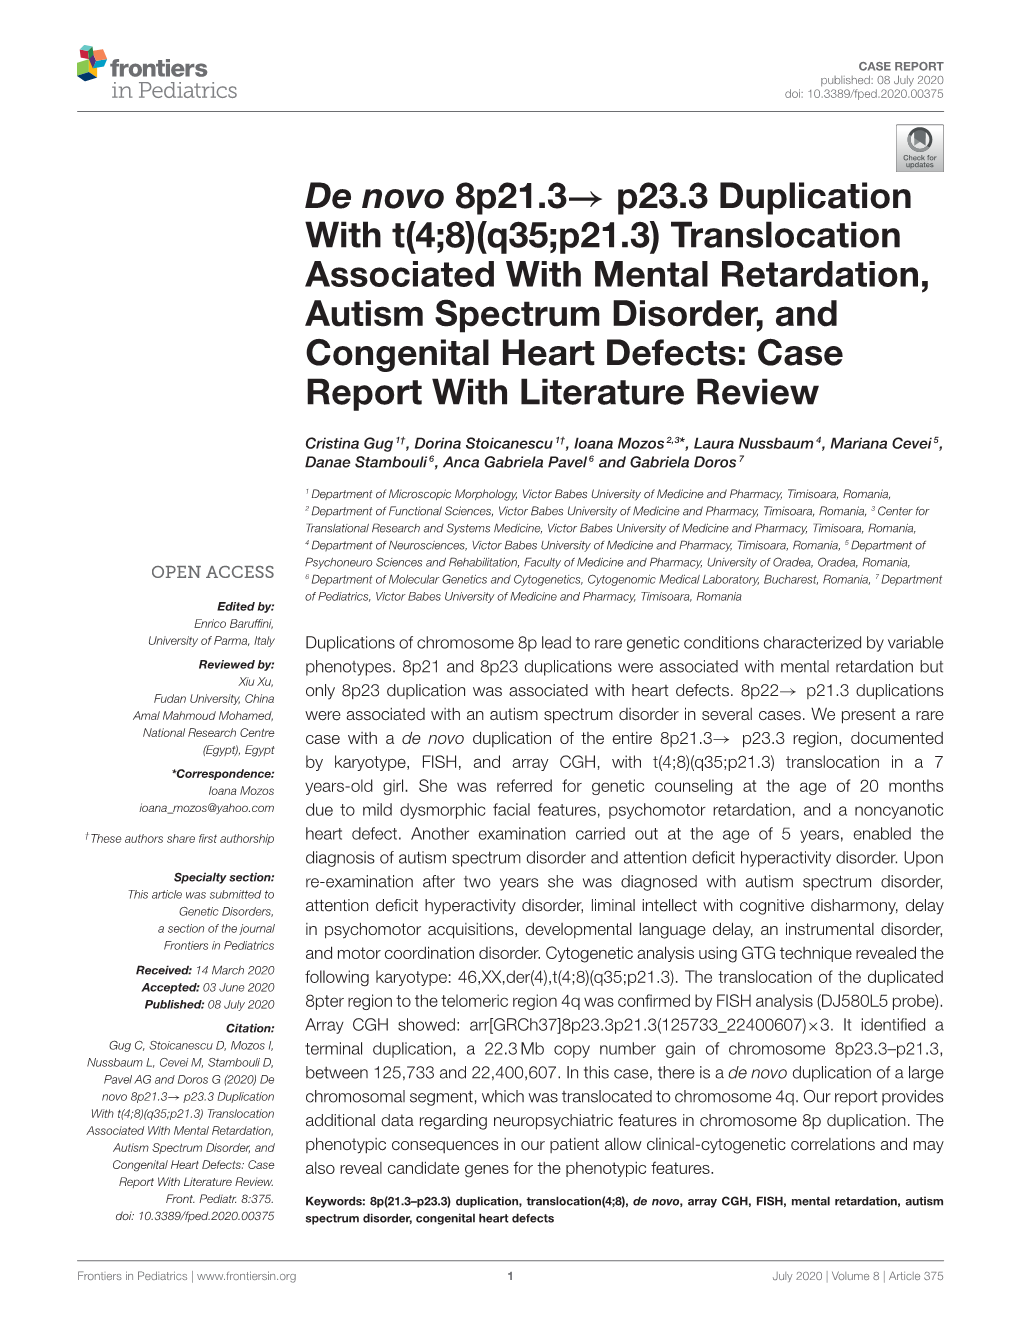 Translocation Associated with Mental Retardation, Autism Spectrum Disorder, and Congenital Heart Defects: Case Report with Literature Review